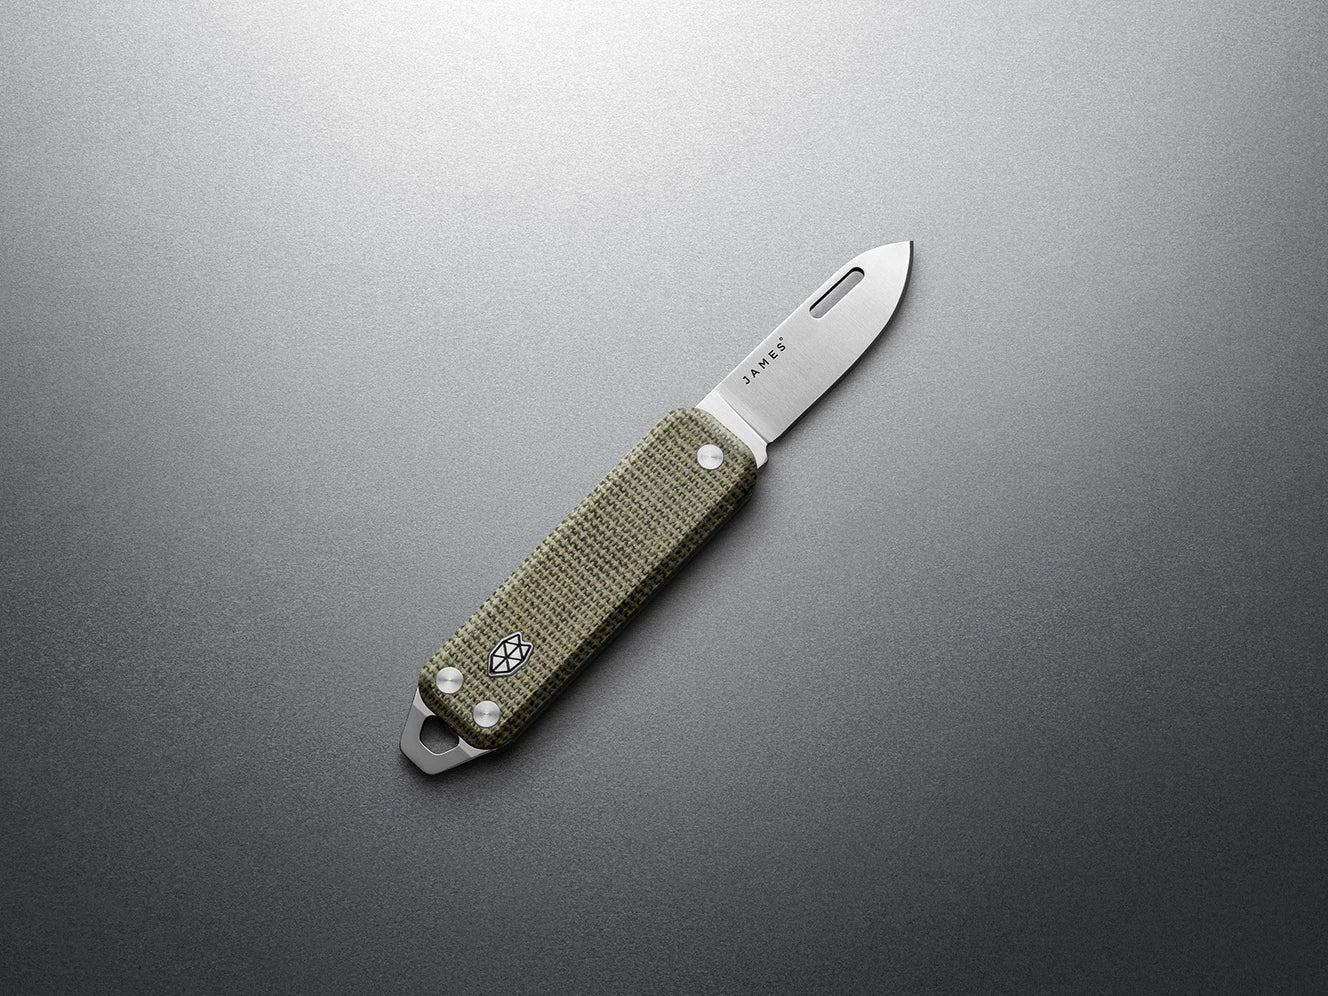 The Elko - OD Green Stainless & Micarta